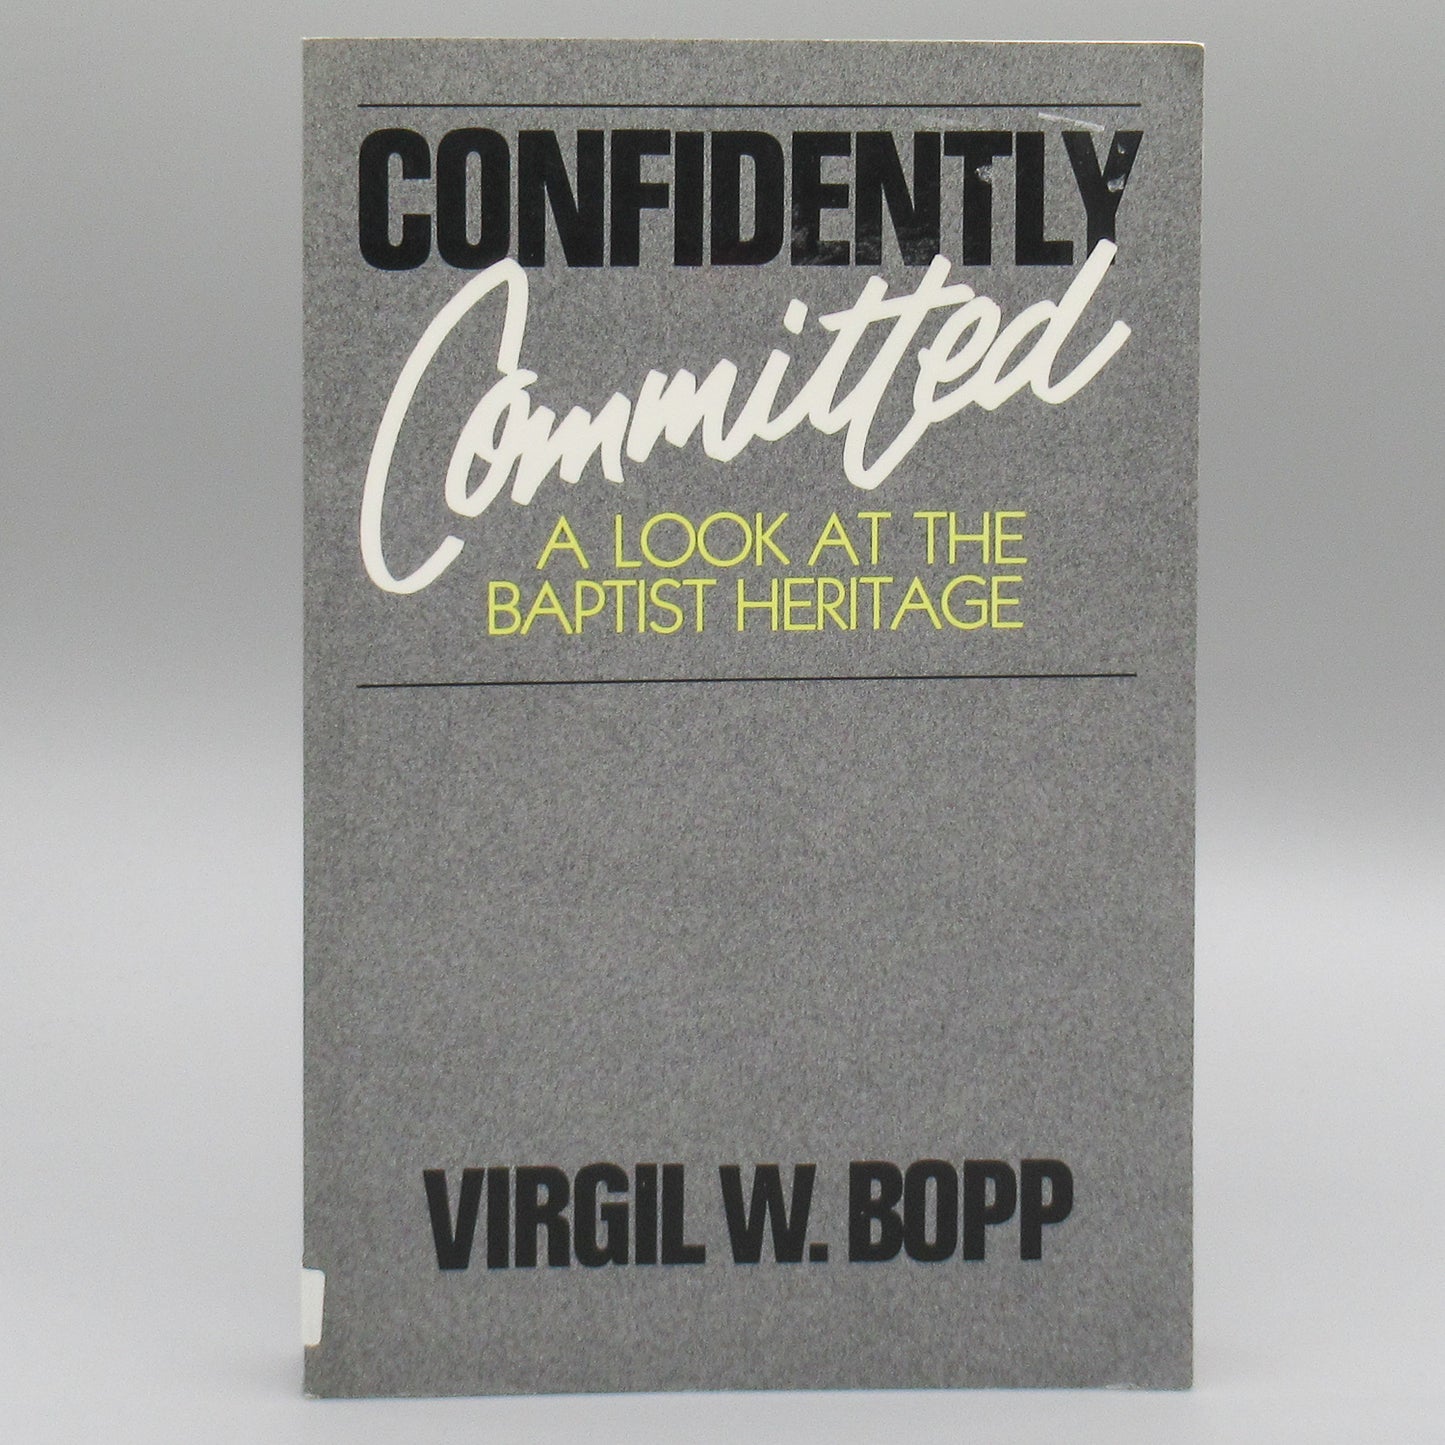 Confidently Committed: A Look at the Baptist Heritage